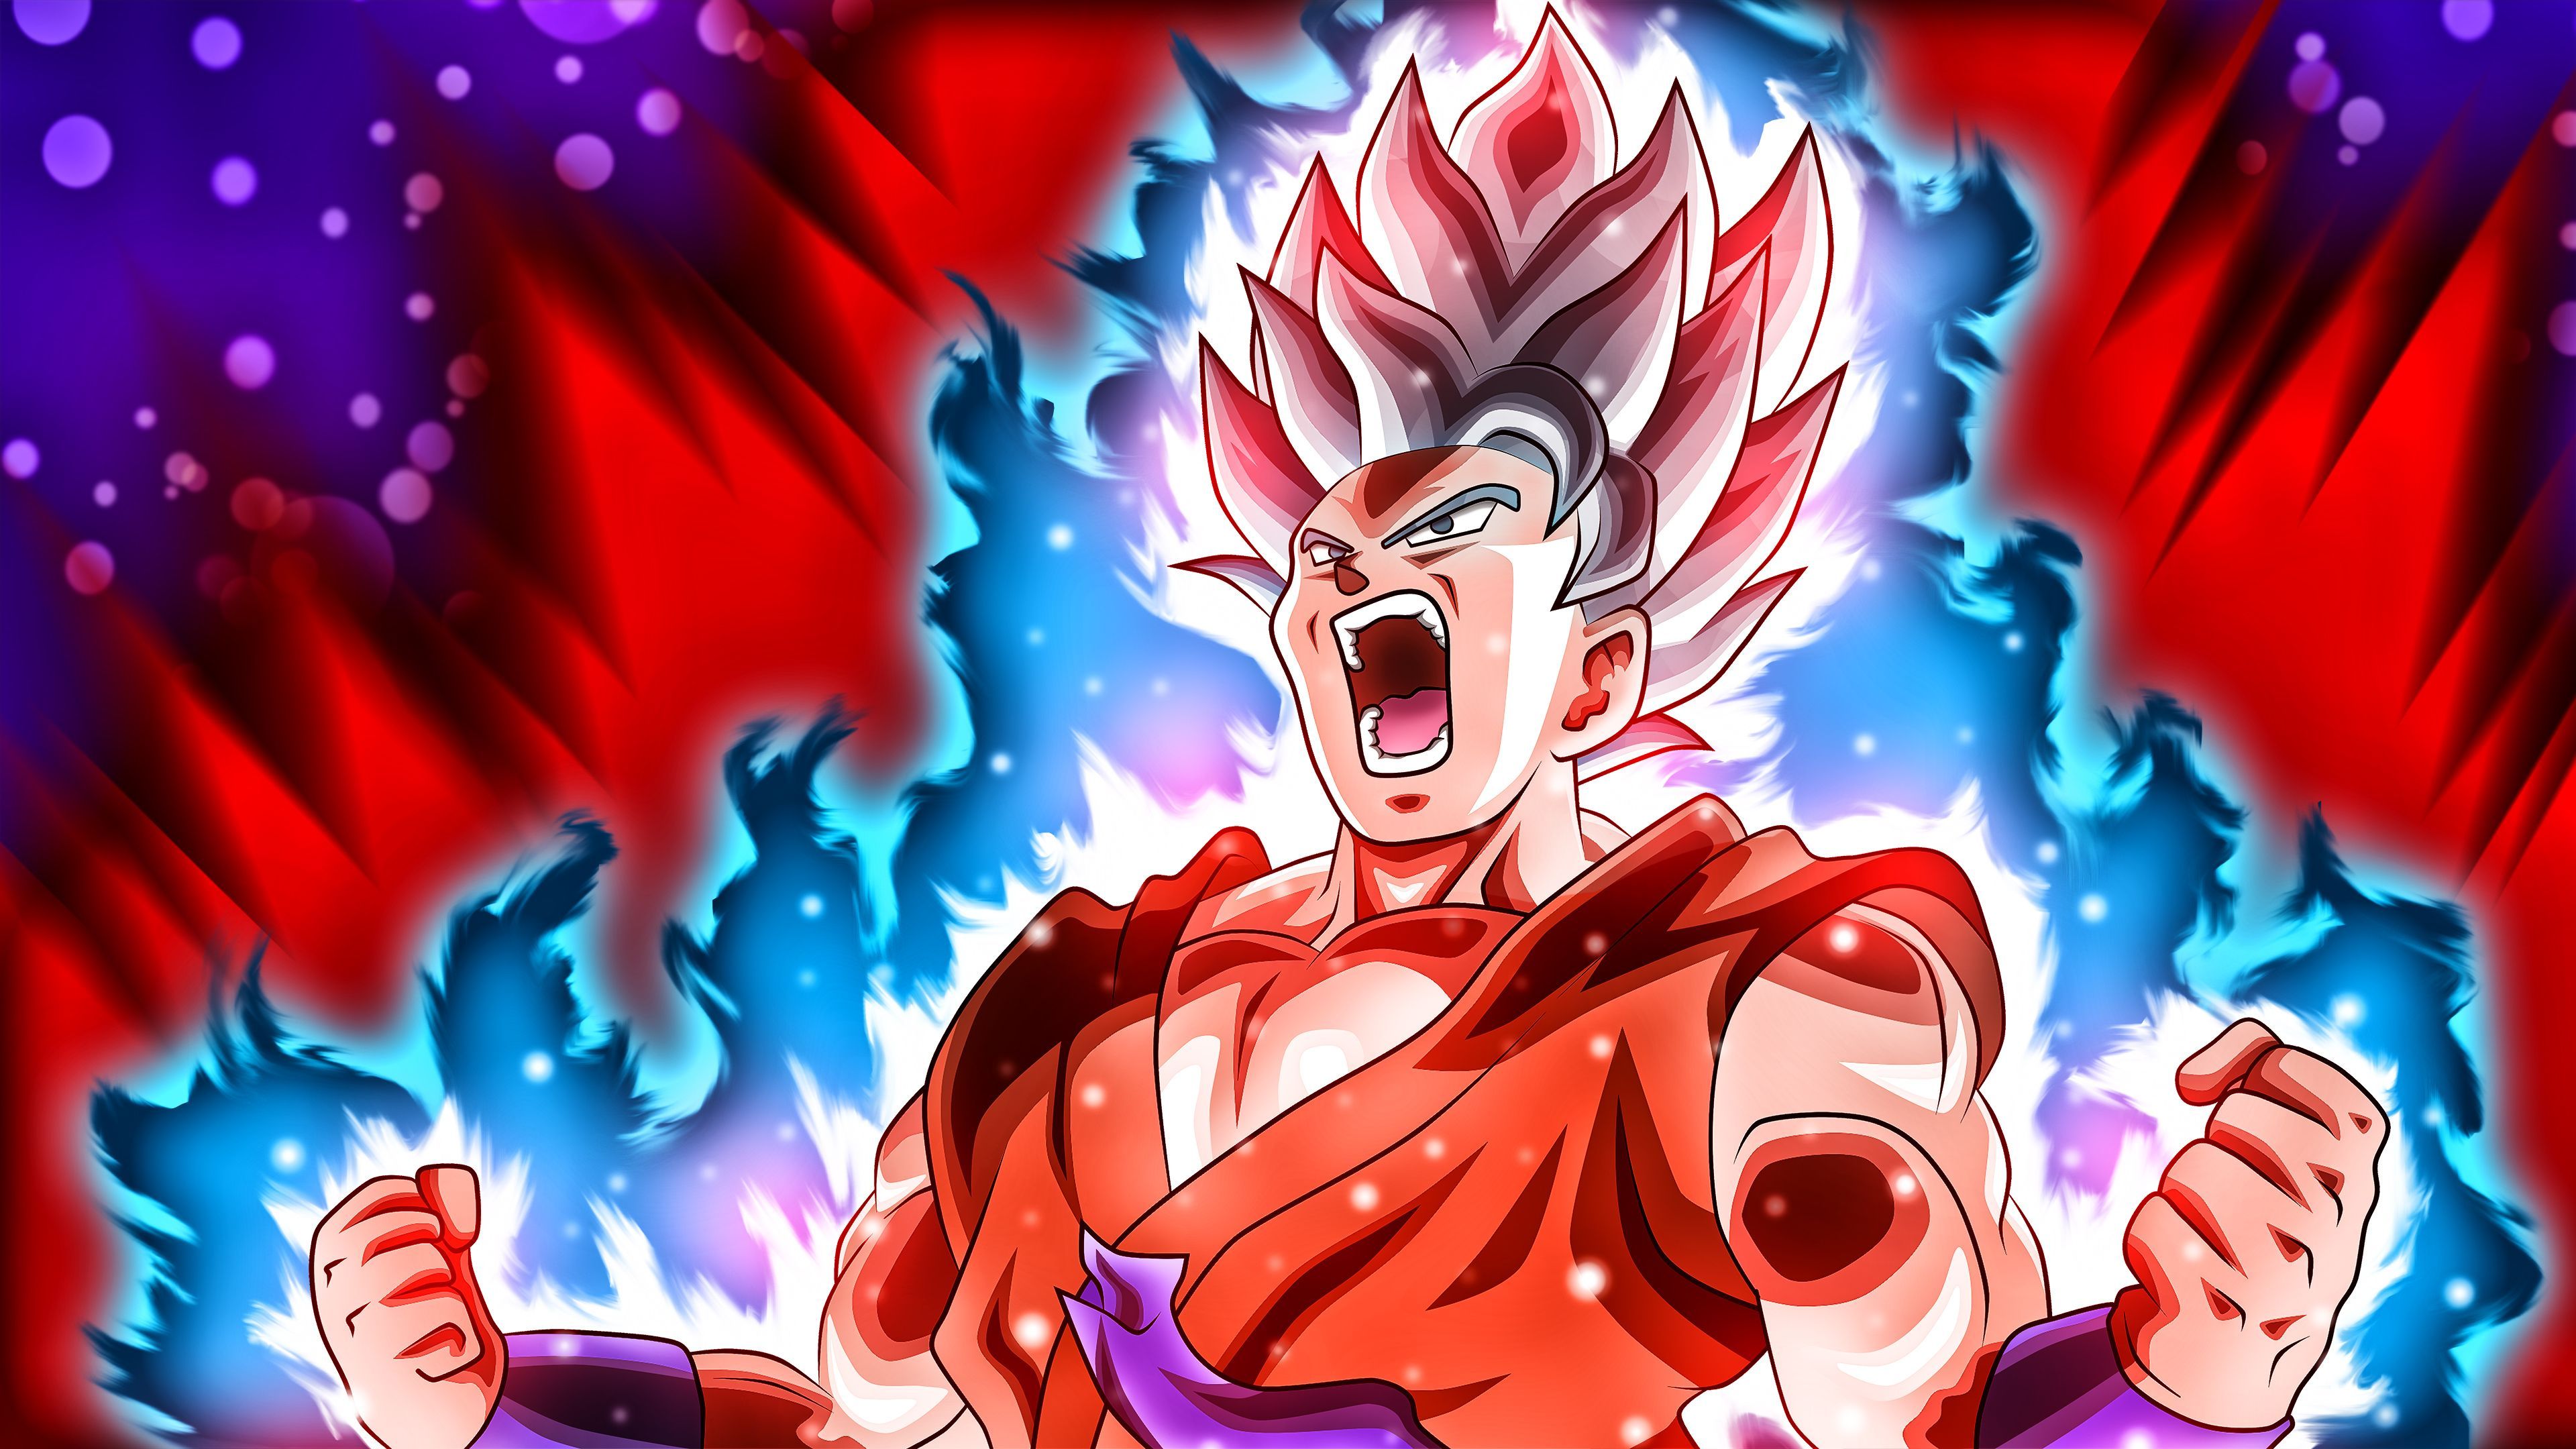 Goku's Ultimate Form: Blue Kaioken with White Hair - wide 5